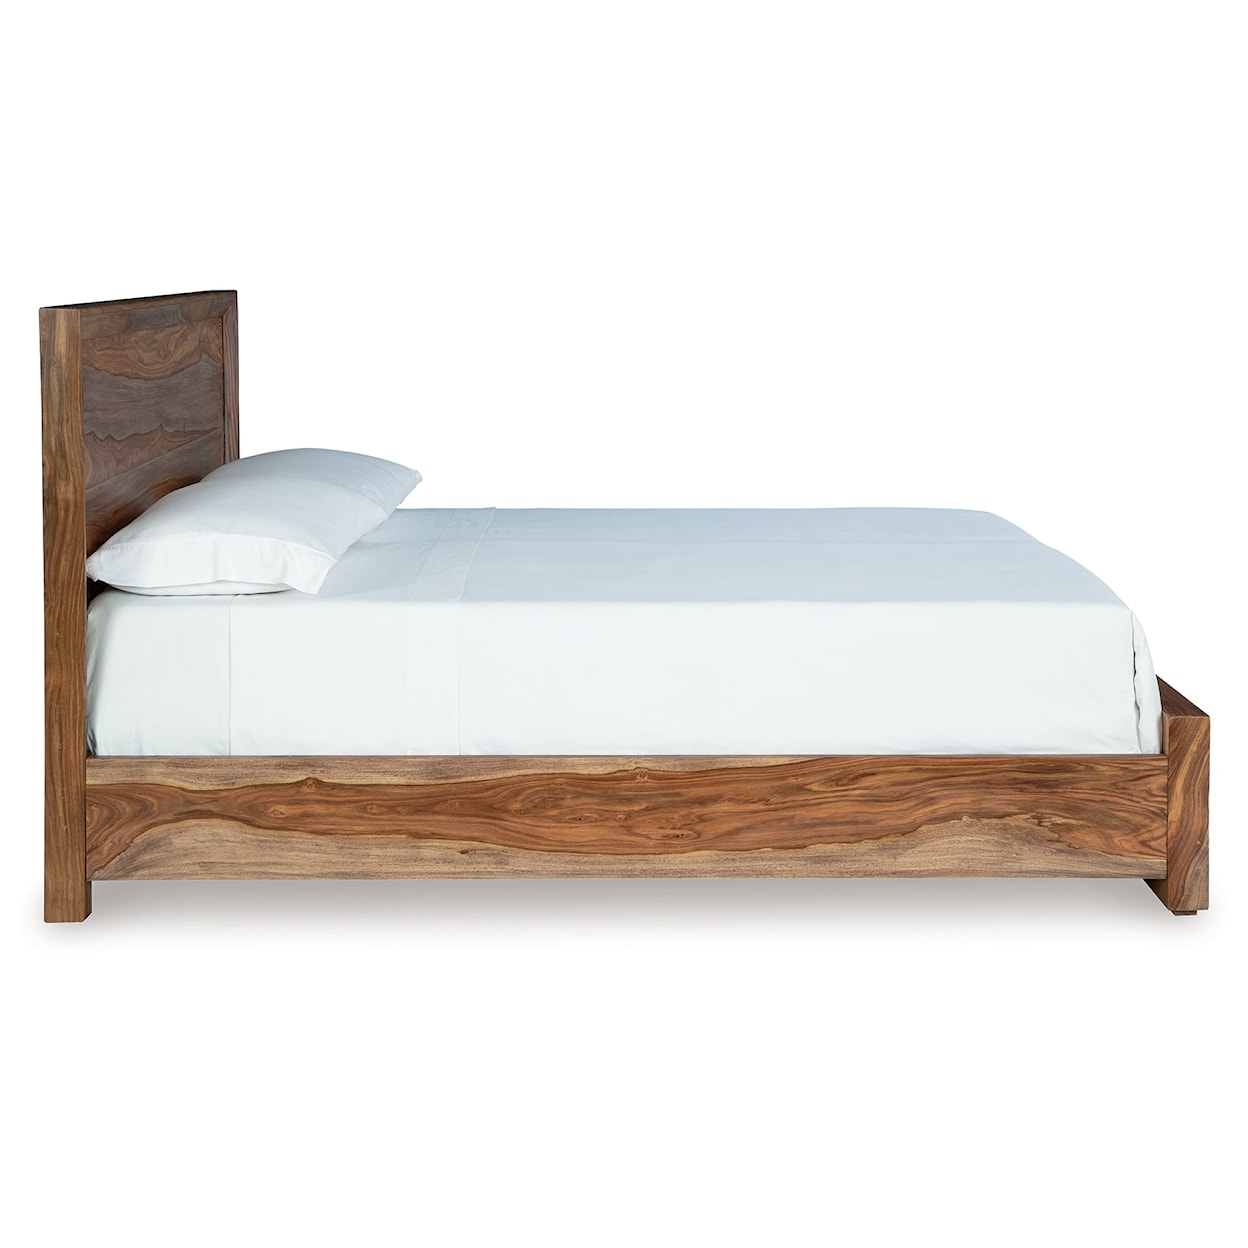 Signature Design by Ashley Dressonni California King Panel Bed